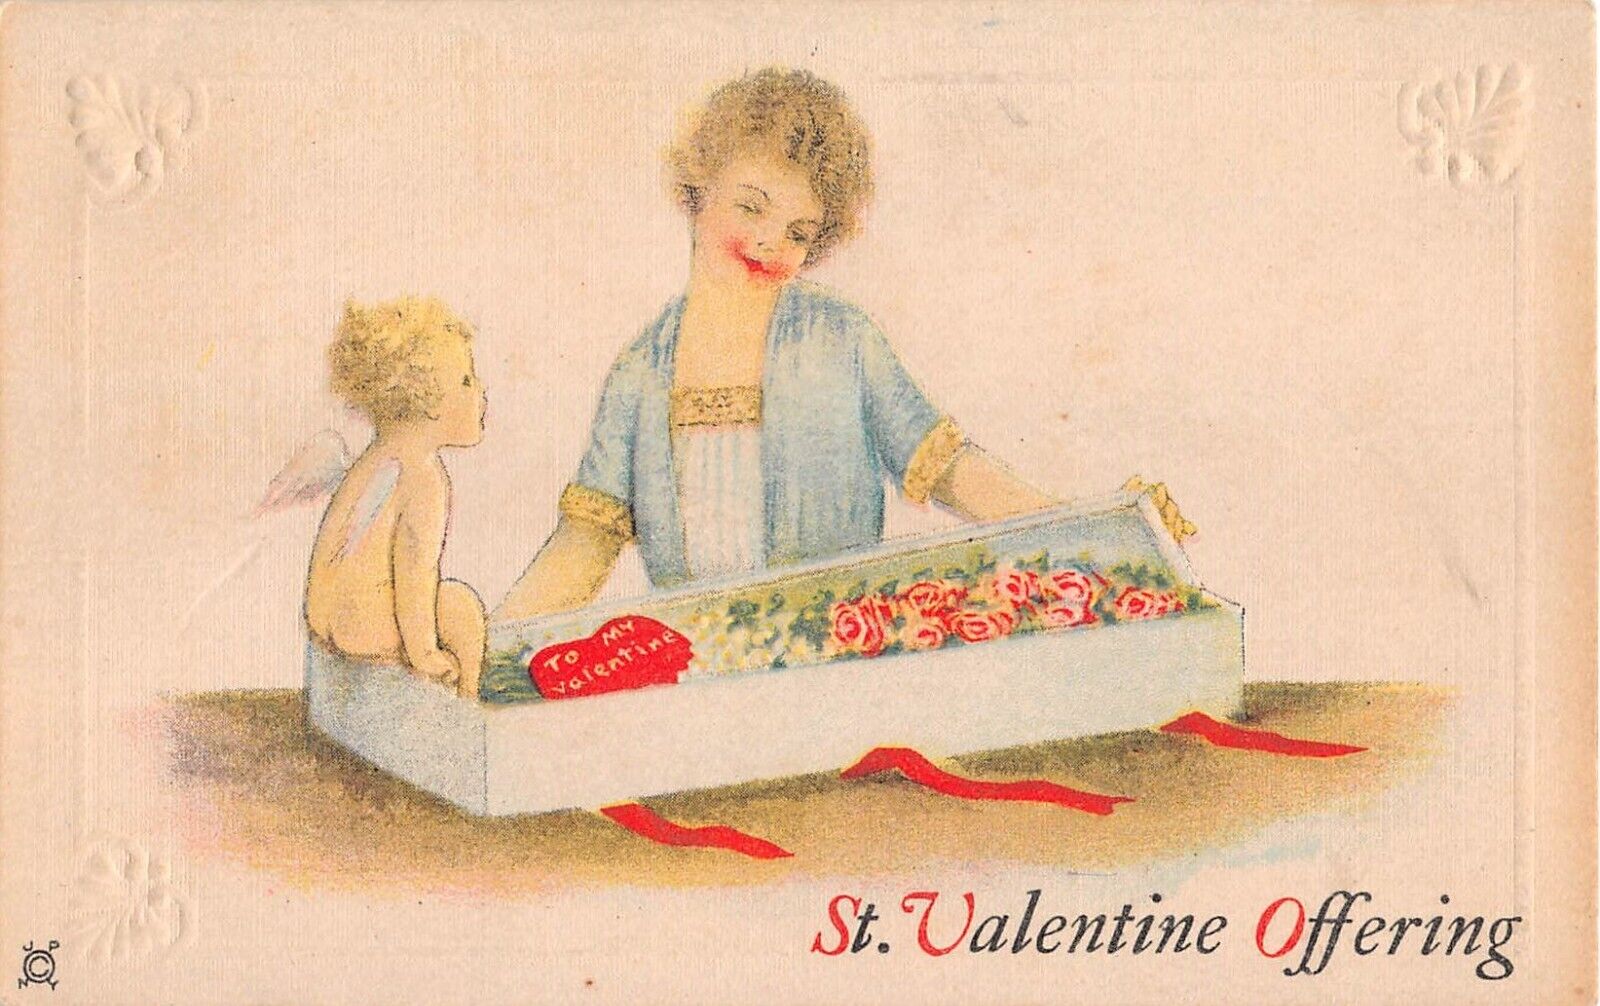 Cupid by Pretty Lady Opening Gift Box of Roses-Old Art Deco Valentine's Day PC